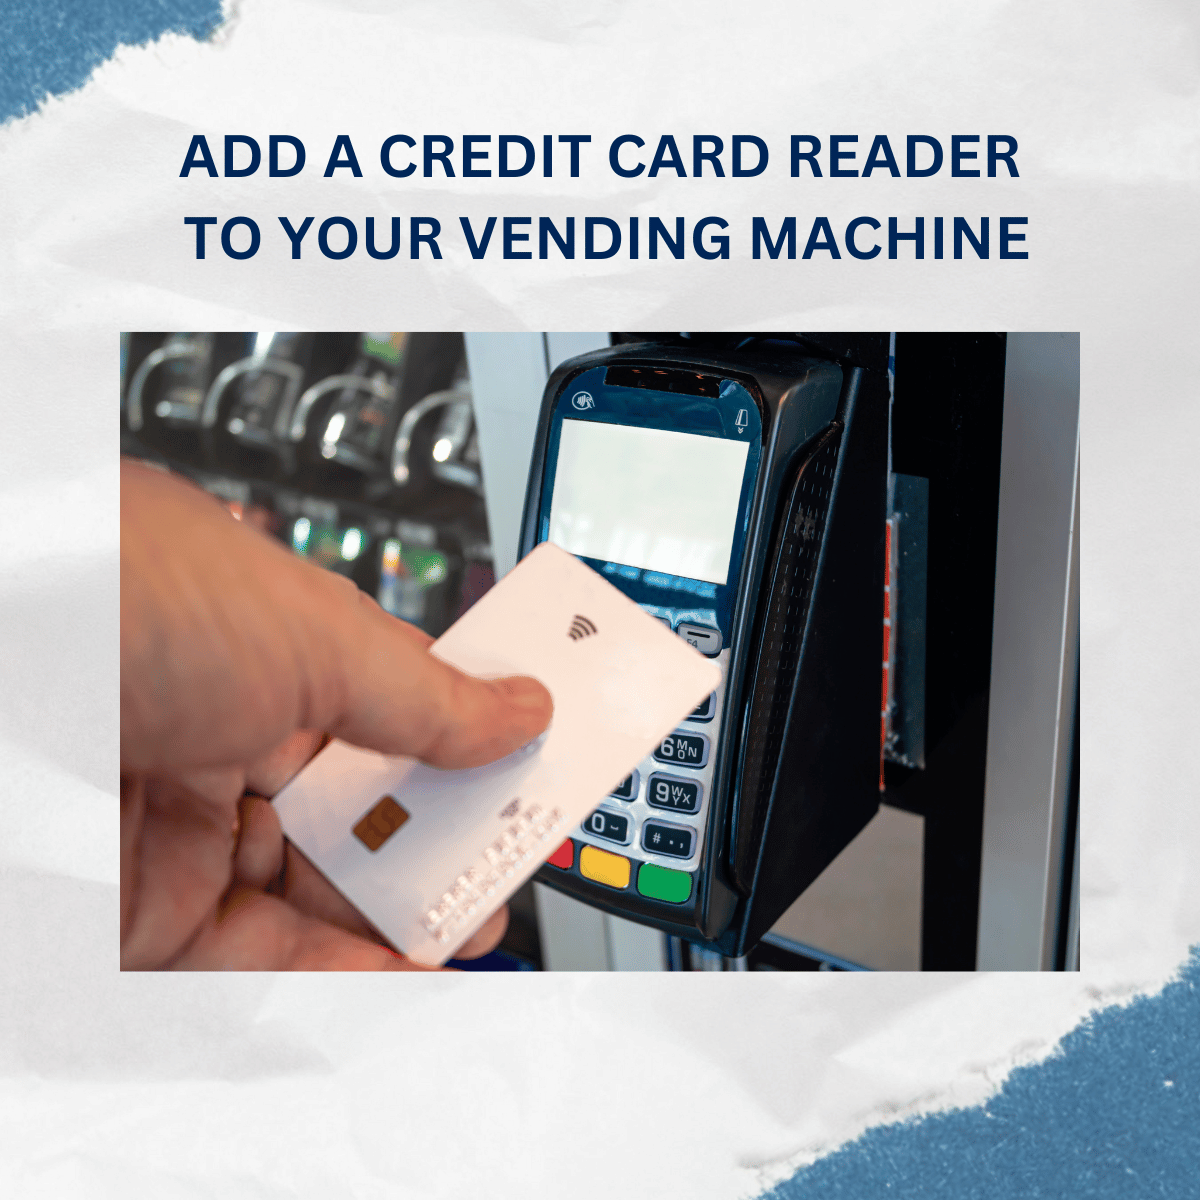 ADD A CREDIT CARD READER TO YOUR VENDING MACHINE